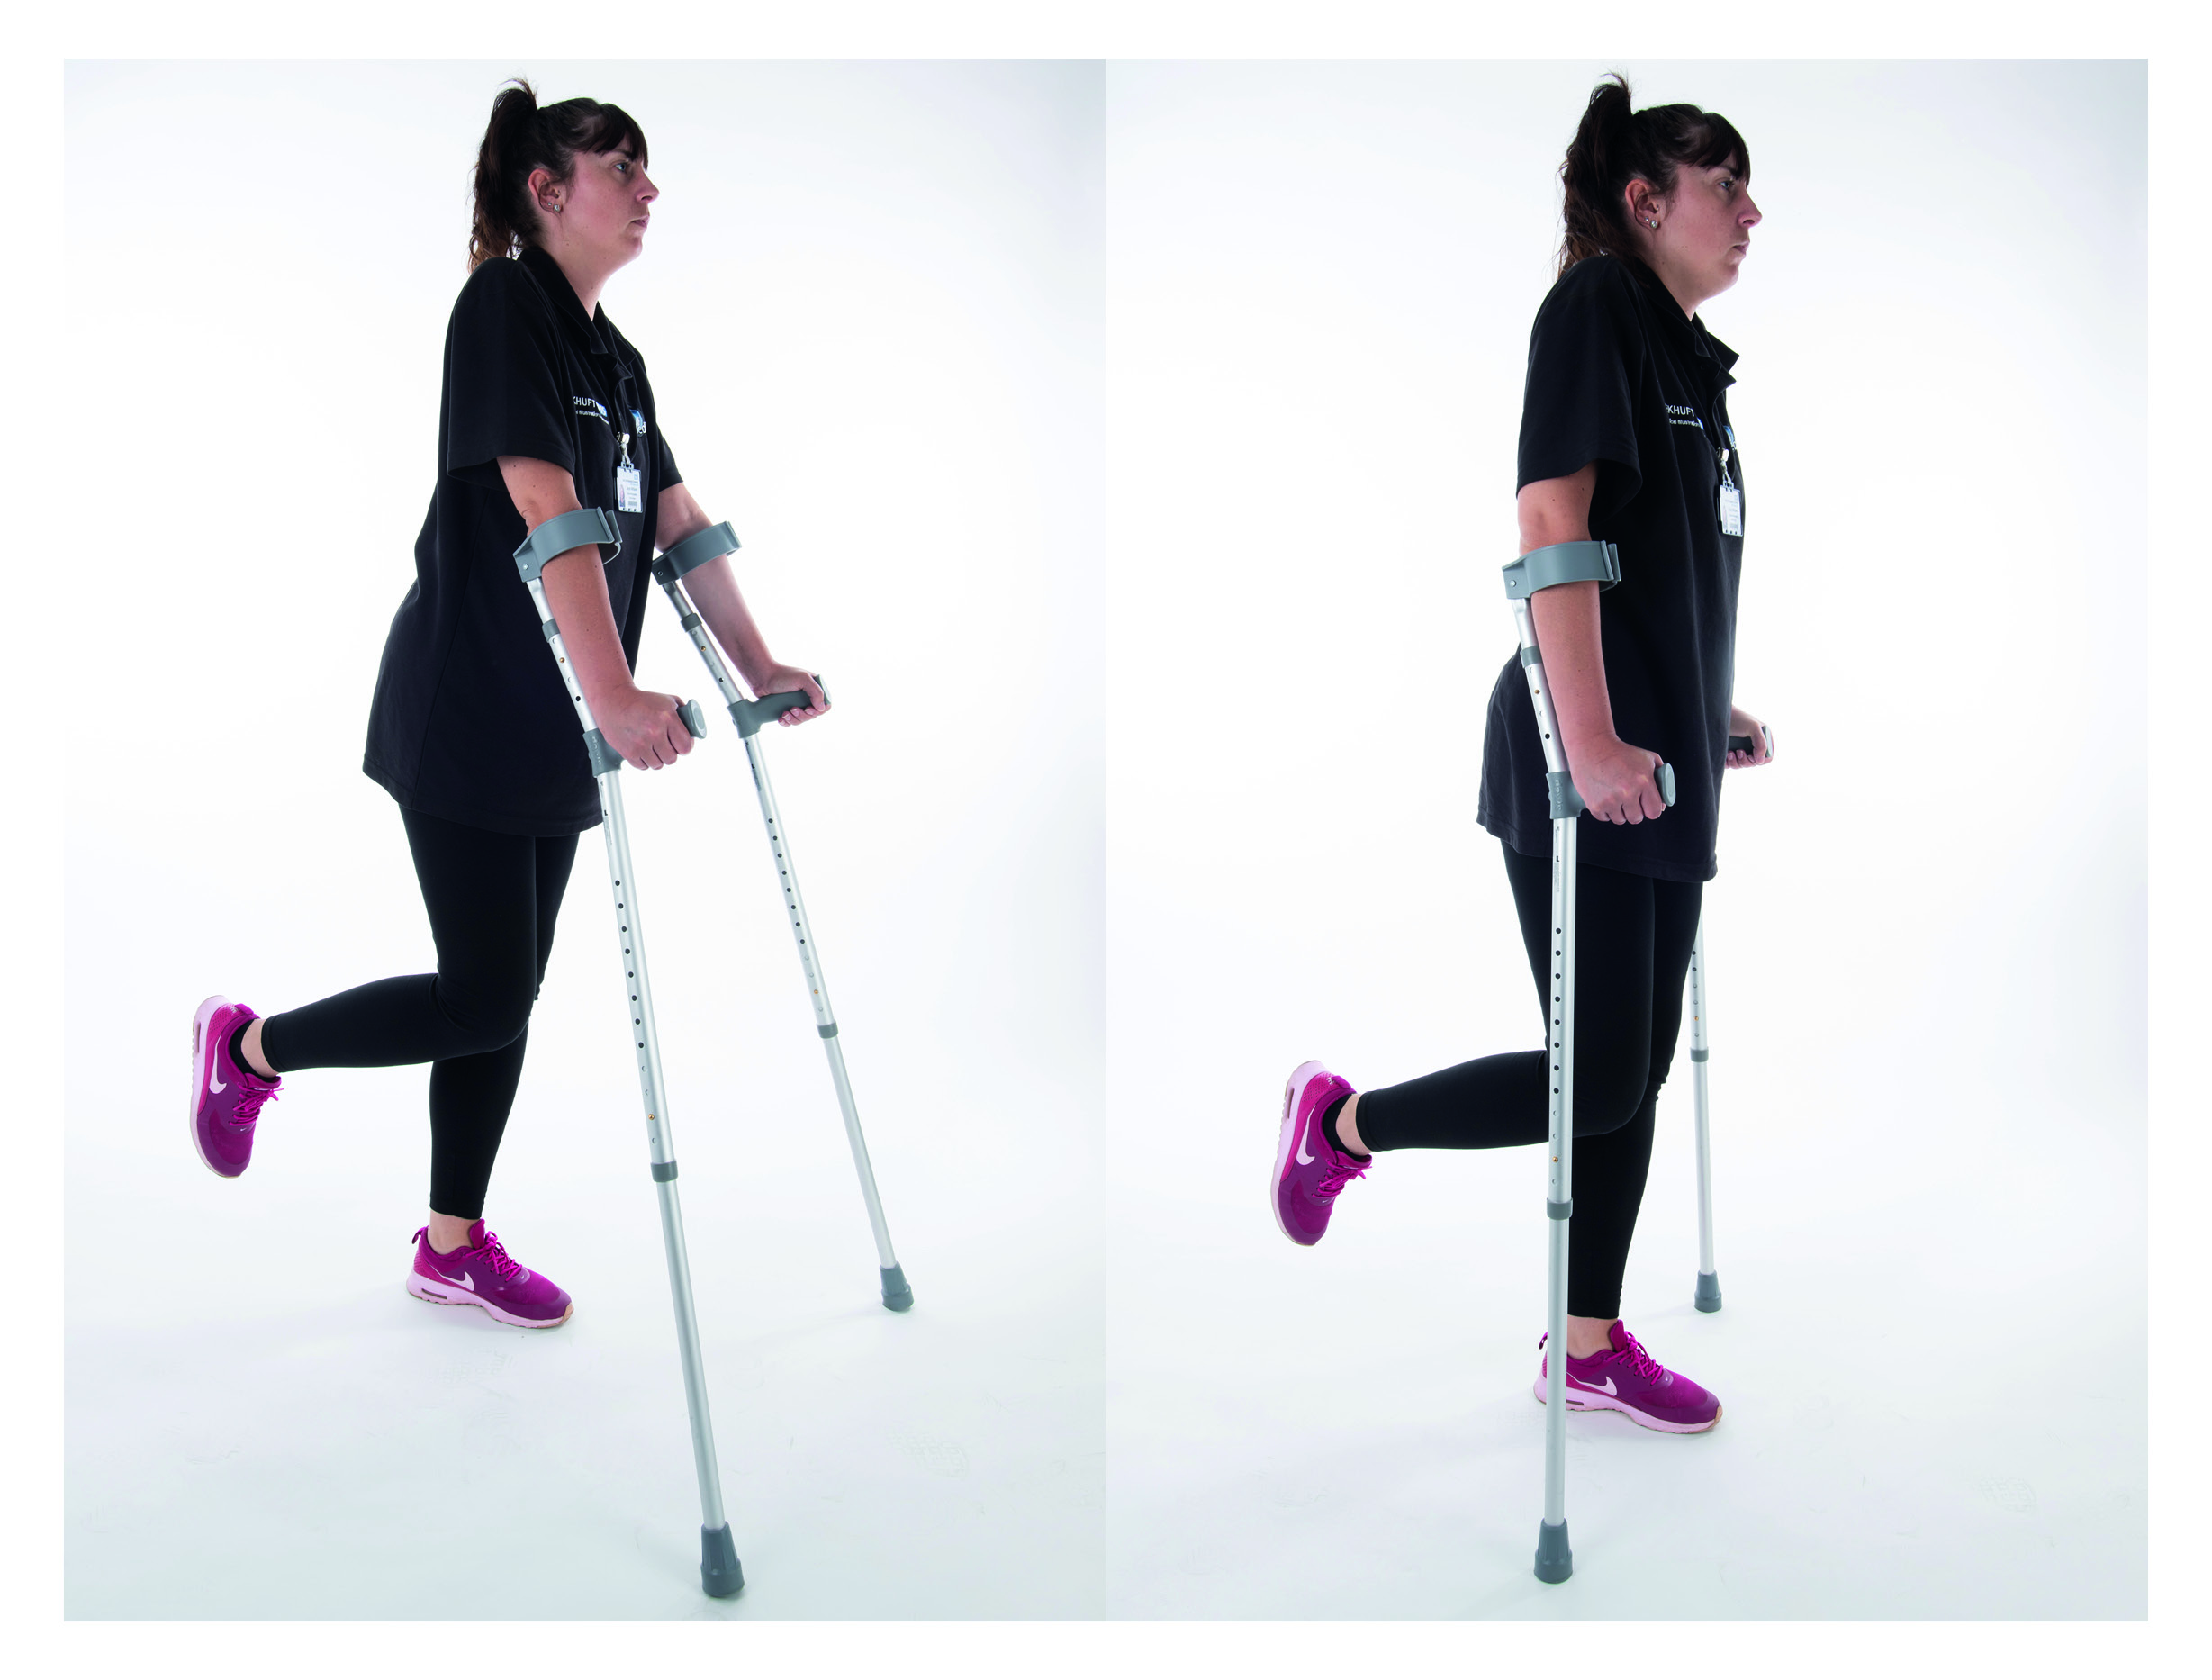 Using crutches to walk (if you are not allowed to put weight on your injured leg)